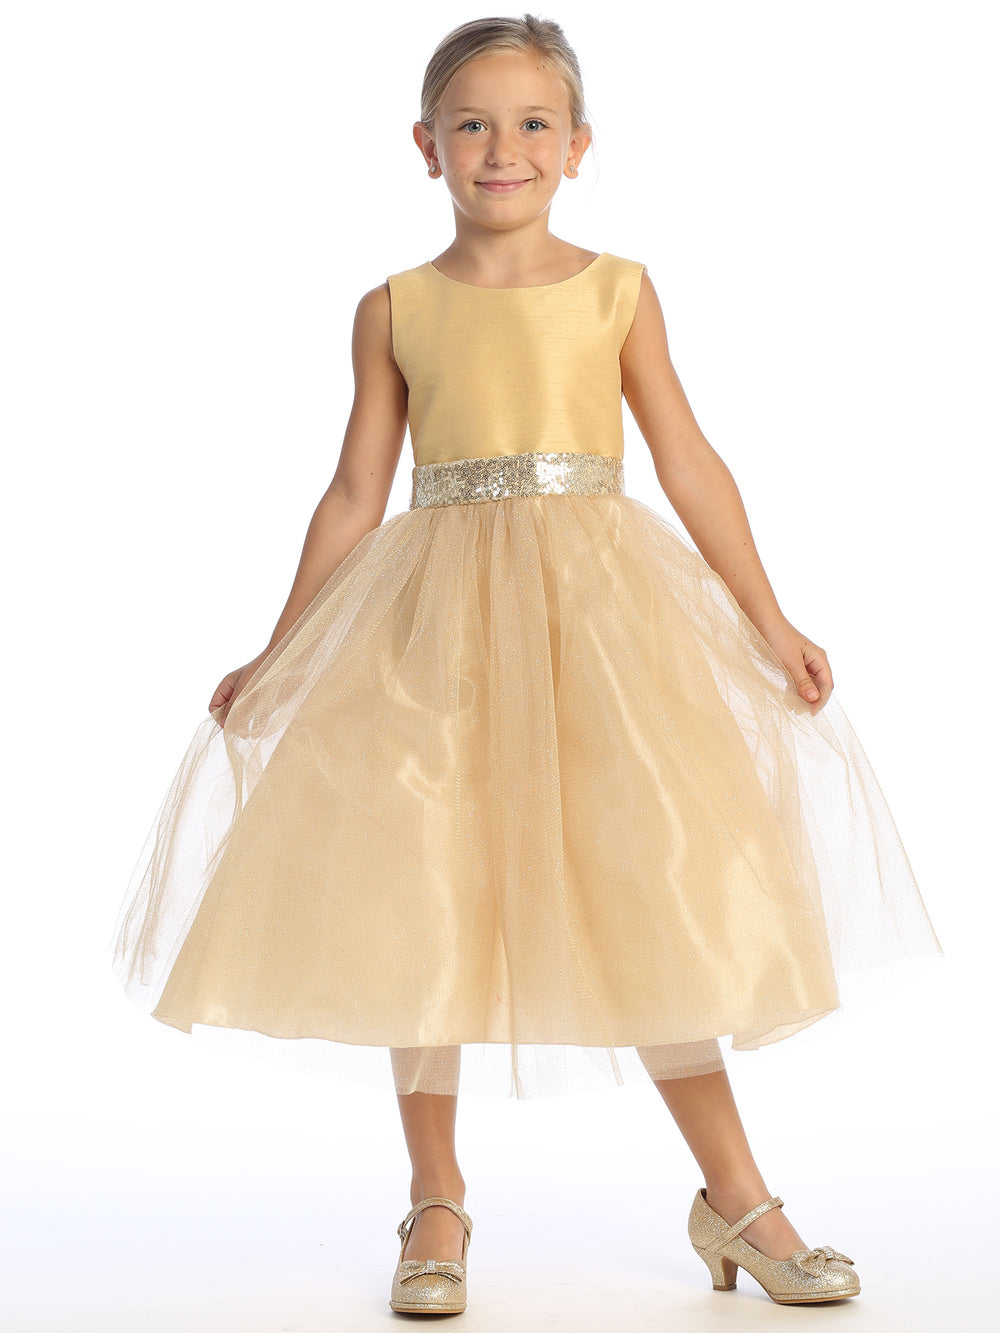 Flower girl dazzles in a gold shantung dress, sequins shimmering in the tulle.